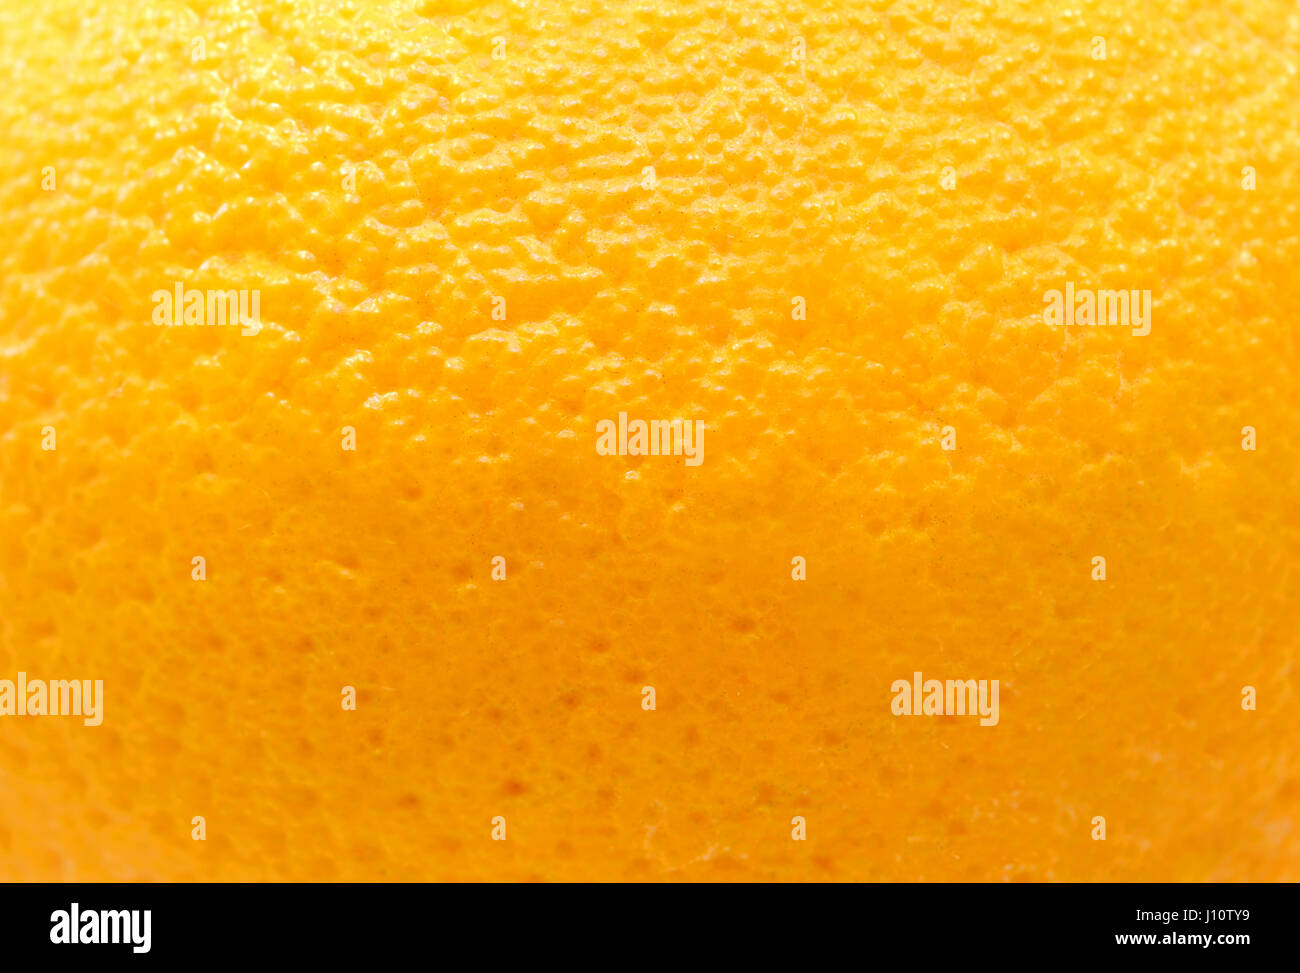 Beautiful Texture Skins Orange Photographed In Close Up Stock Photo Alamy